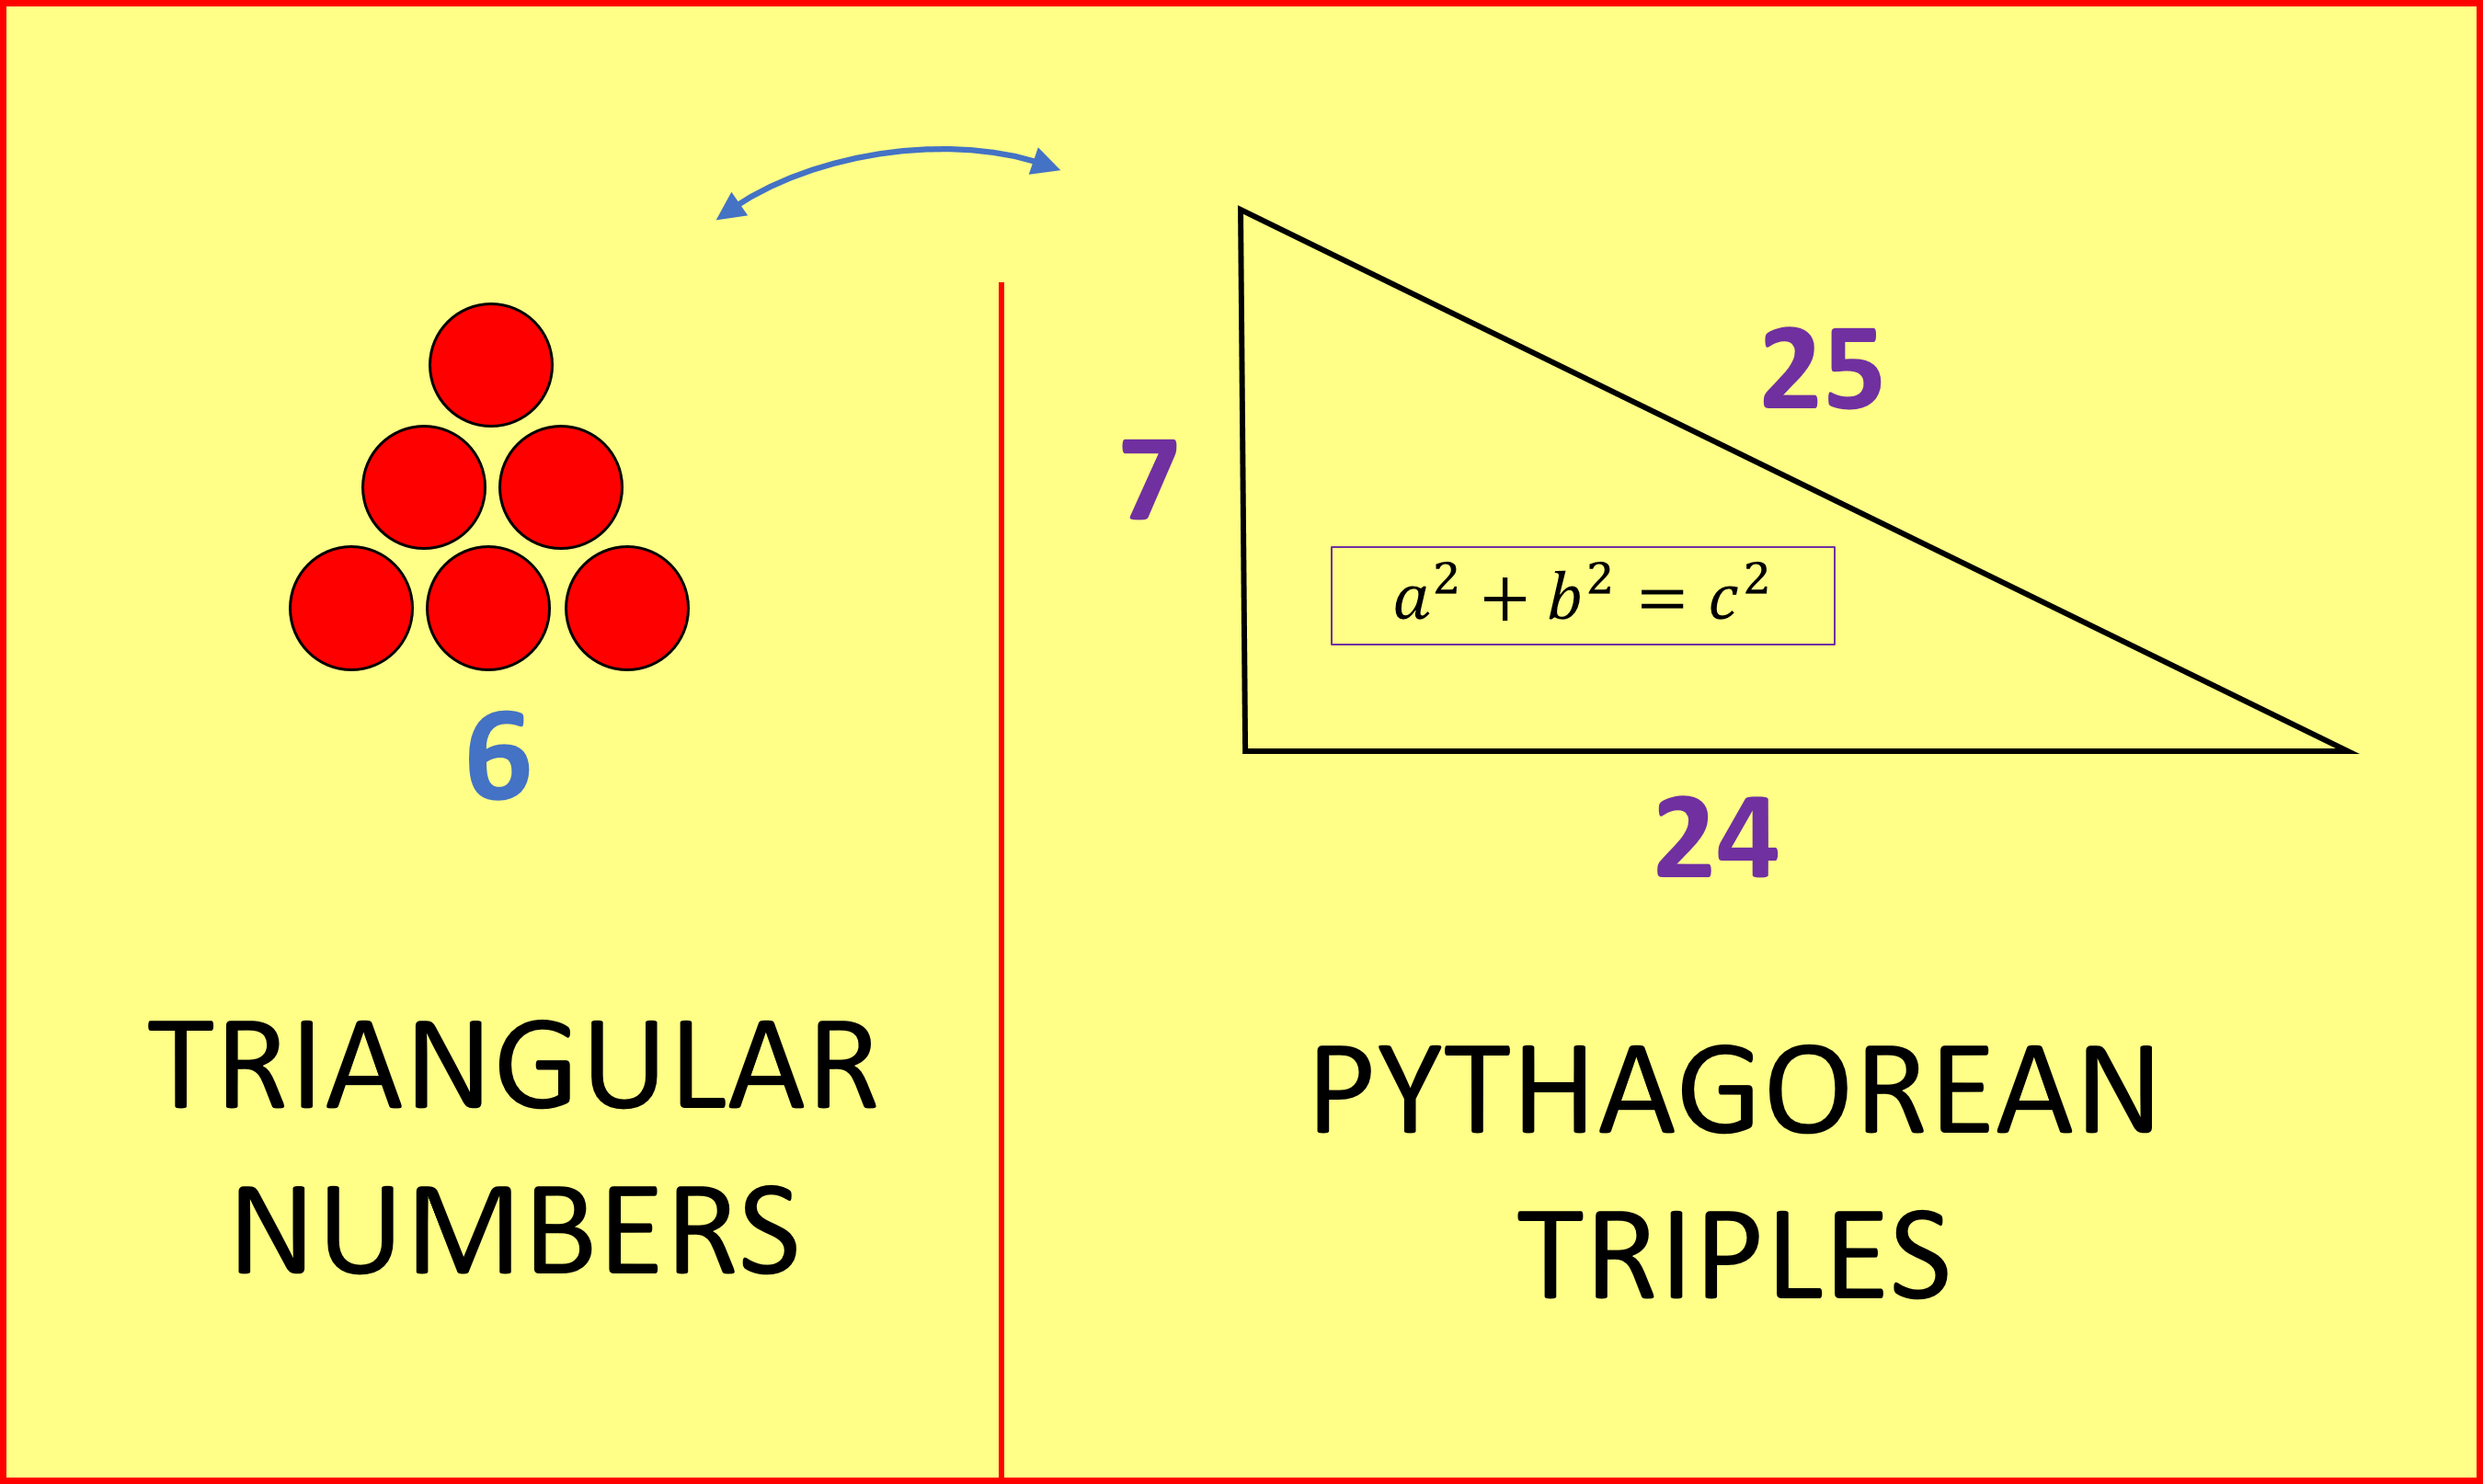 TRIANGULAR NUMBERS AND PYTHAGOREAN TRIPLES - A SURPRISING RELATIONSHIP